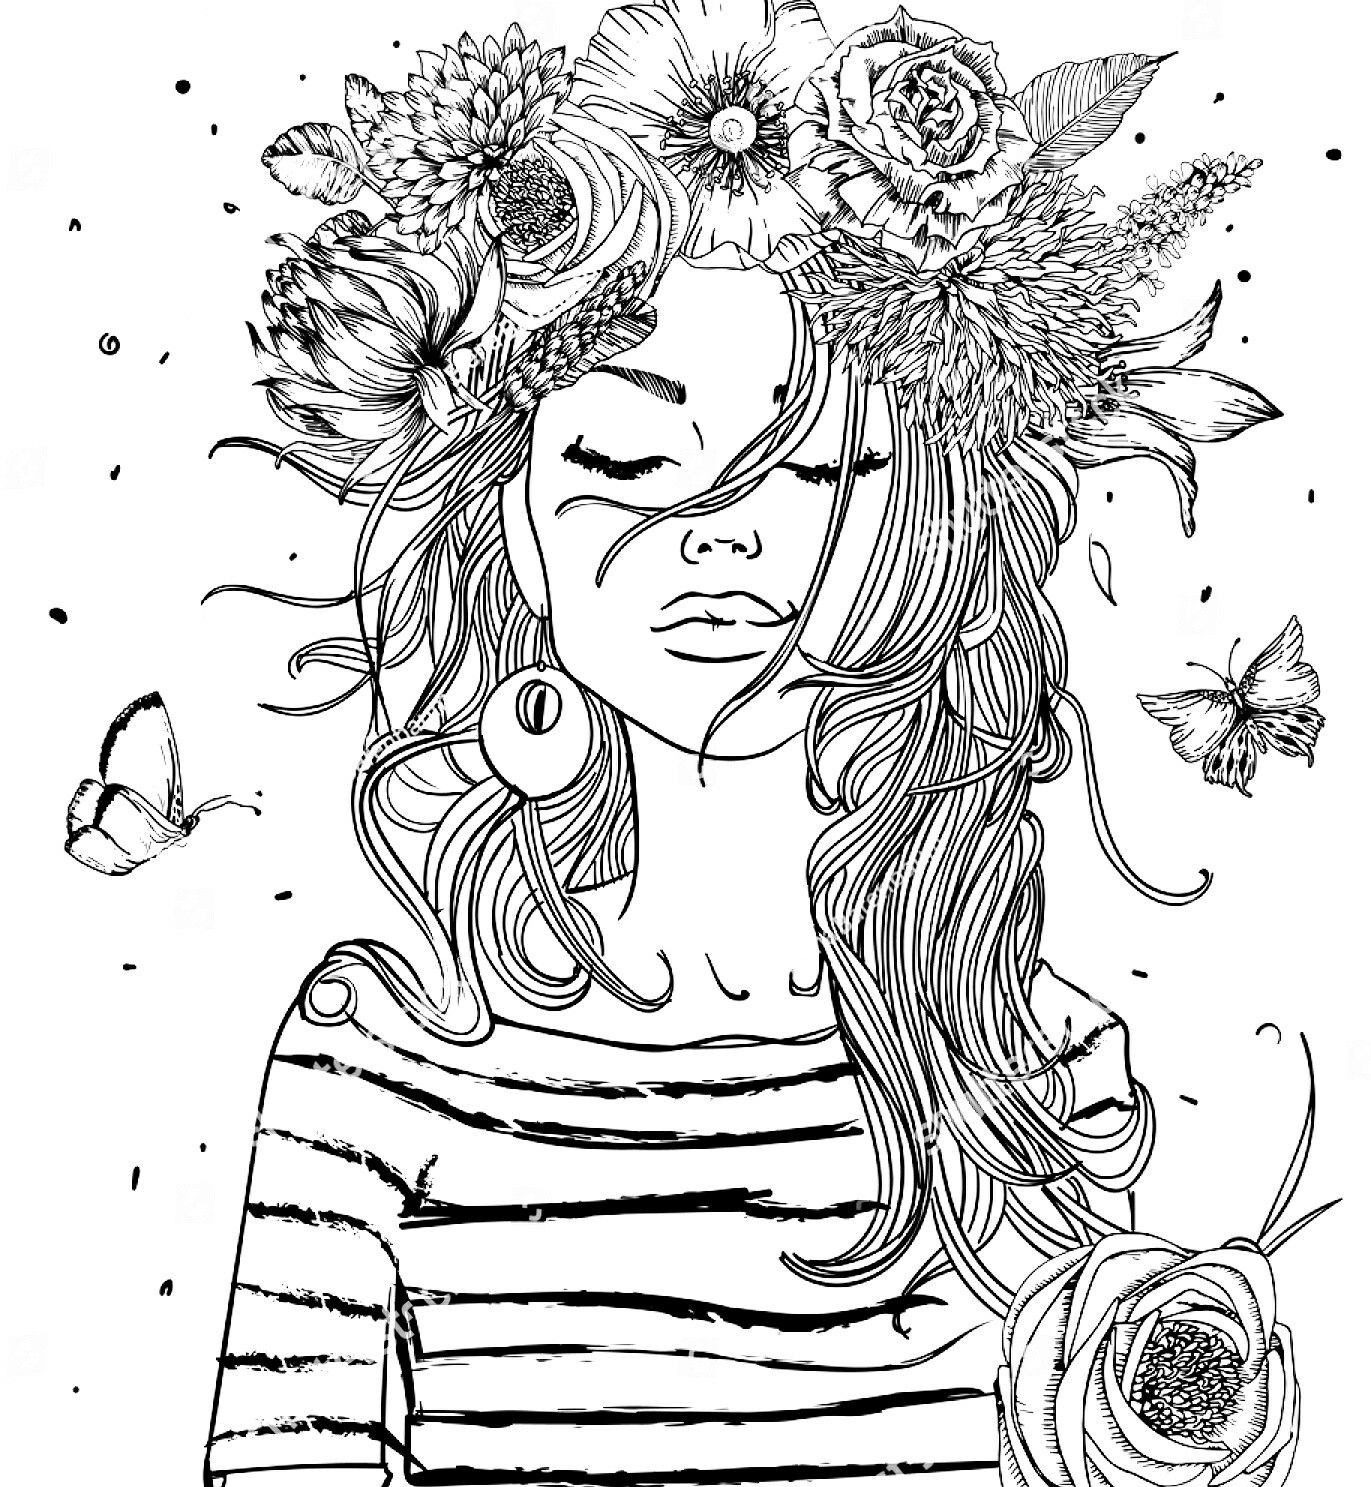 Coloring Pages Of Girls For Adults
 Pin de Gary Simmons en Coloring